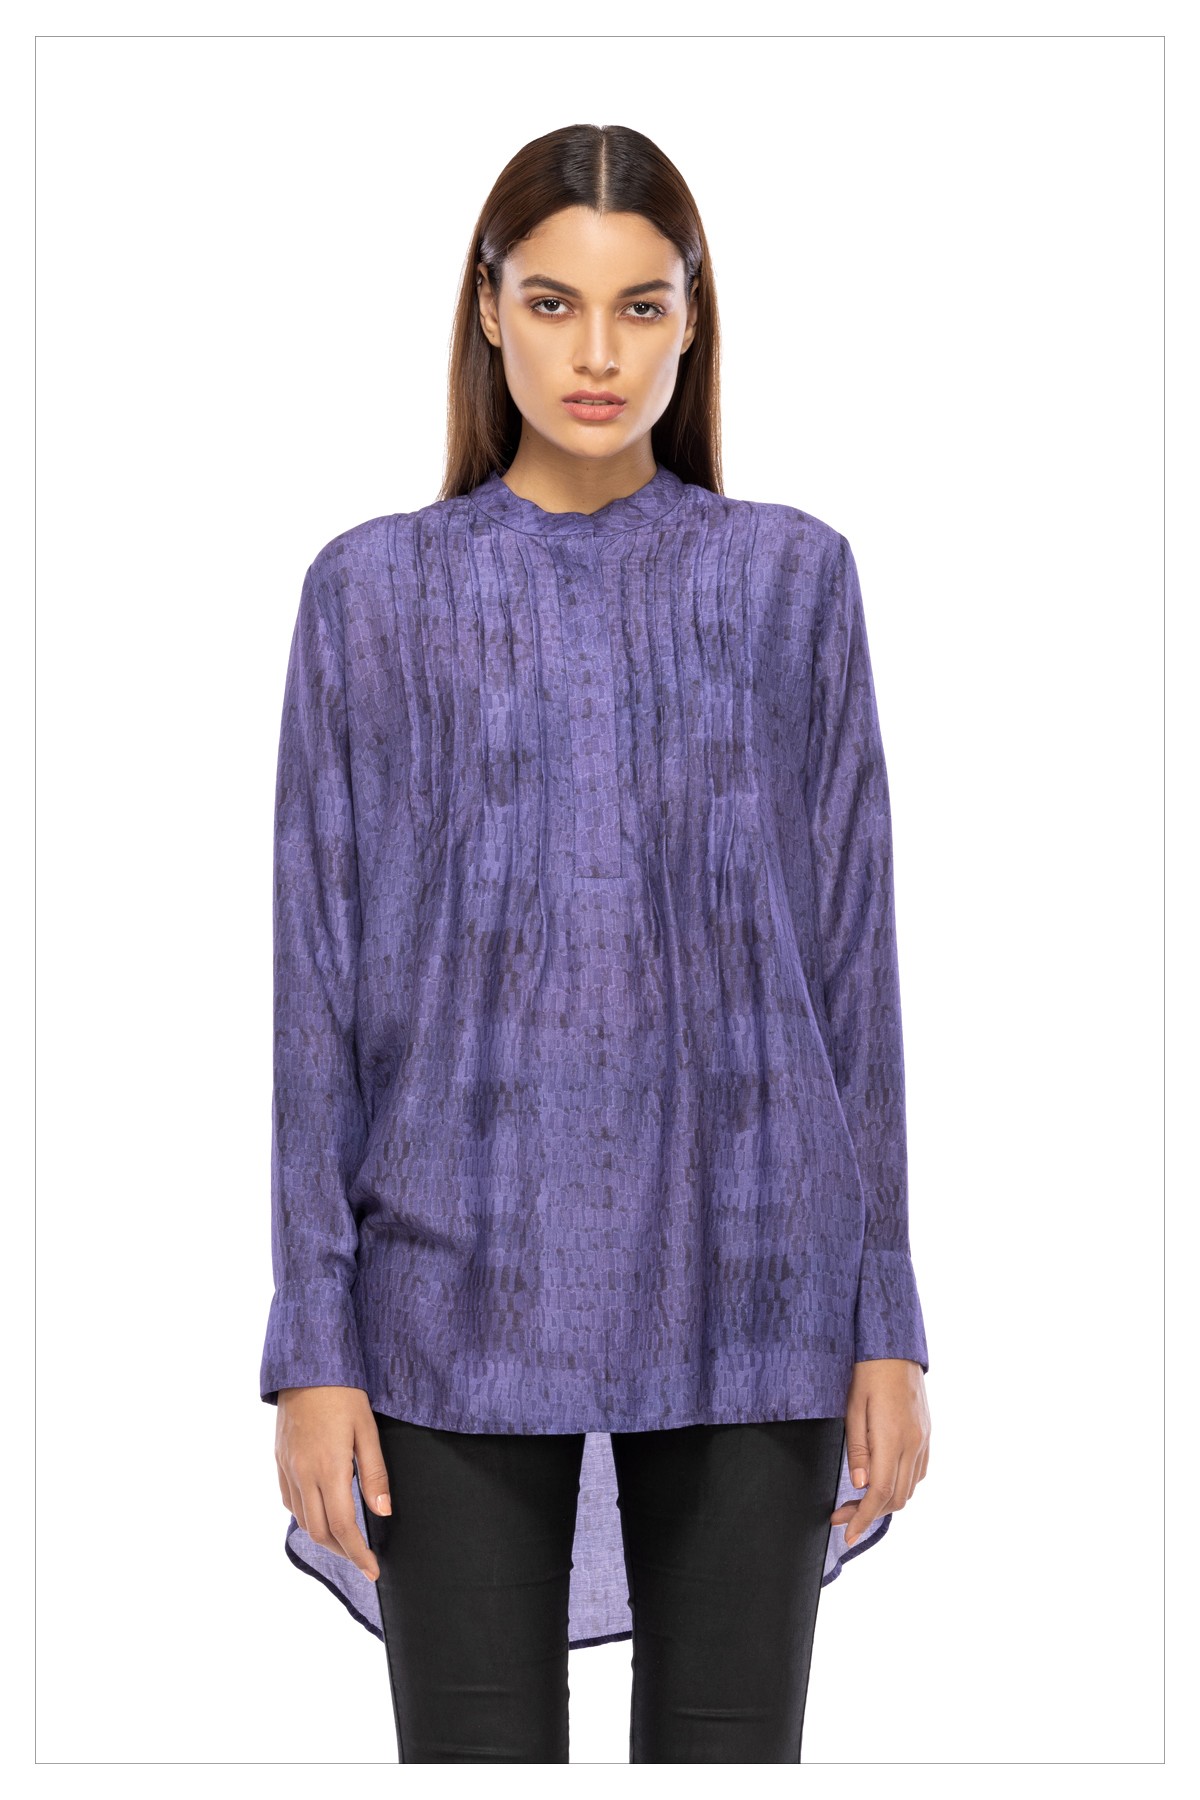 Droplets - Printed Cotton Silk Tunic Top